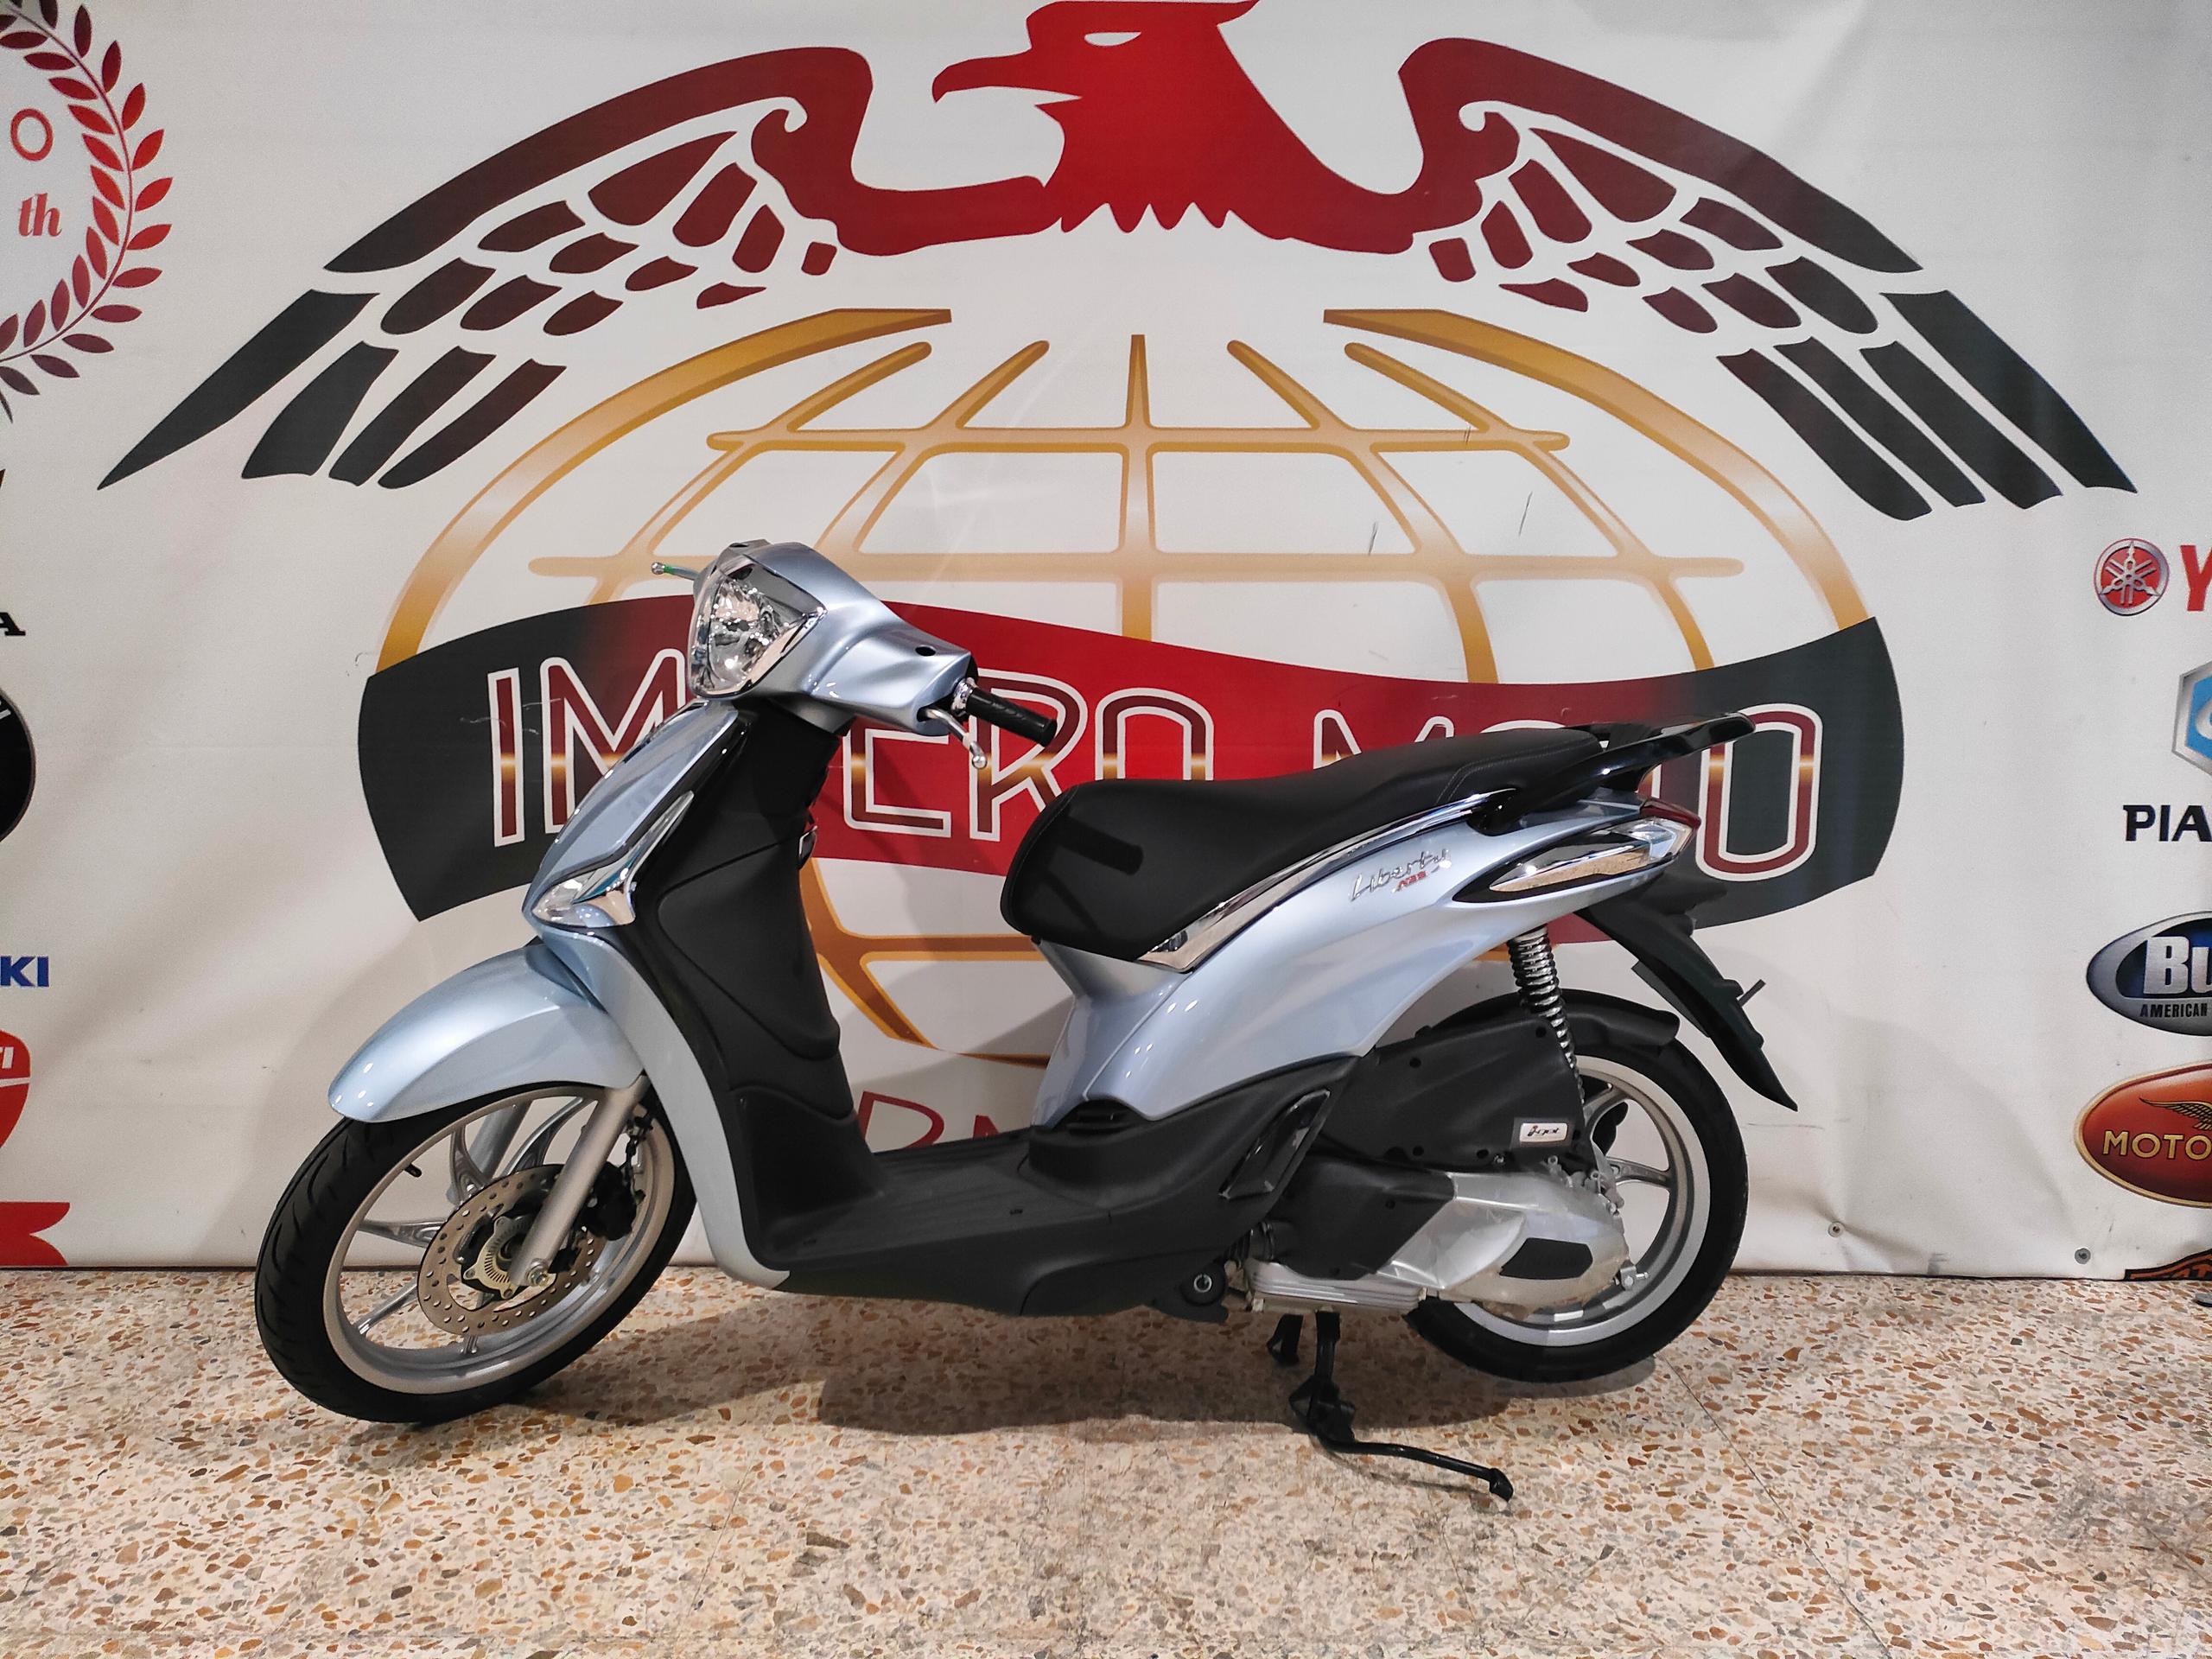 Liberty 125 ABS nuovo in pronta consegna